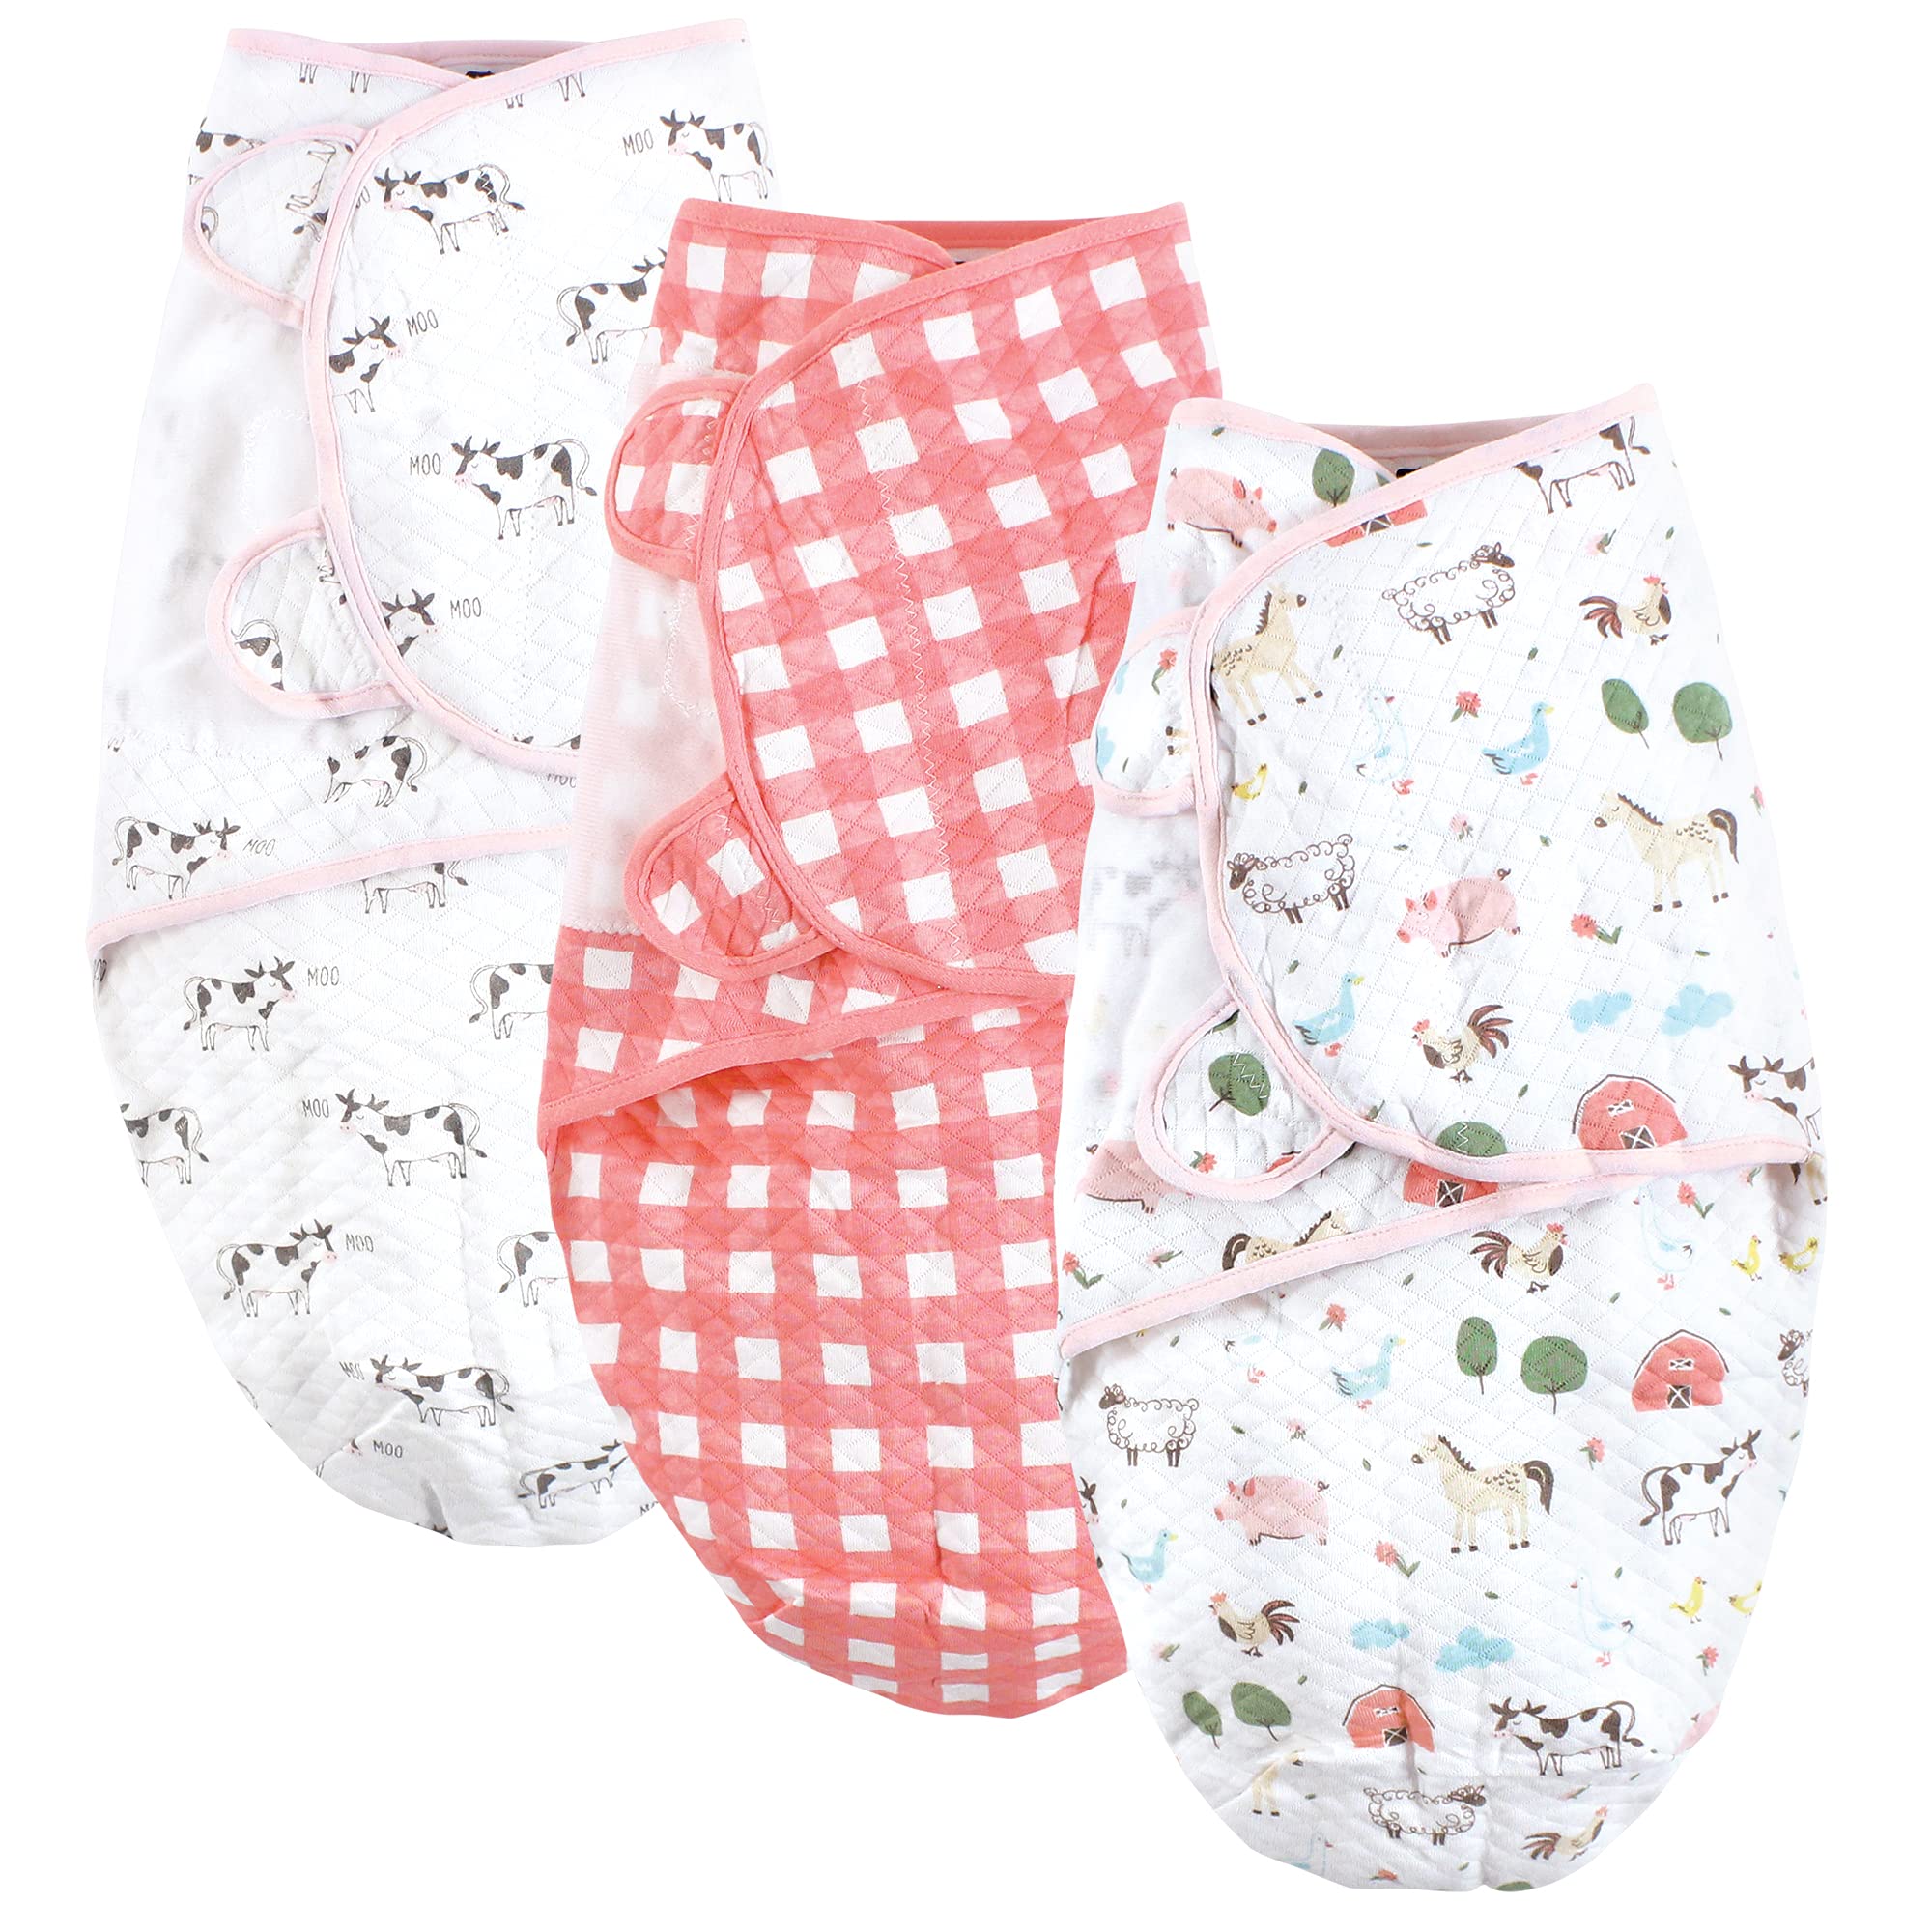 Hudson Baby Unisex Baby Quilted Cotton Swaddle Wrap 3pk